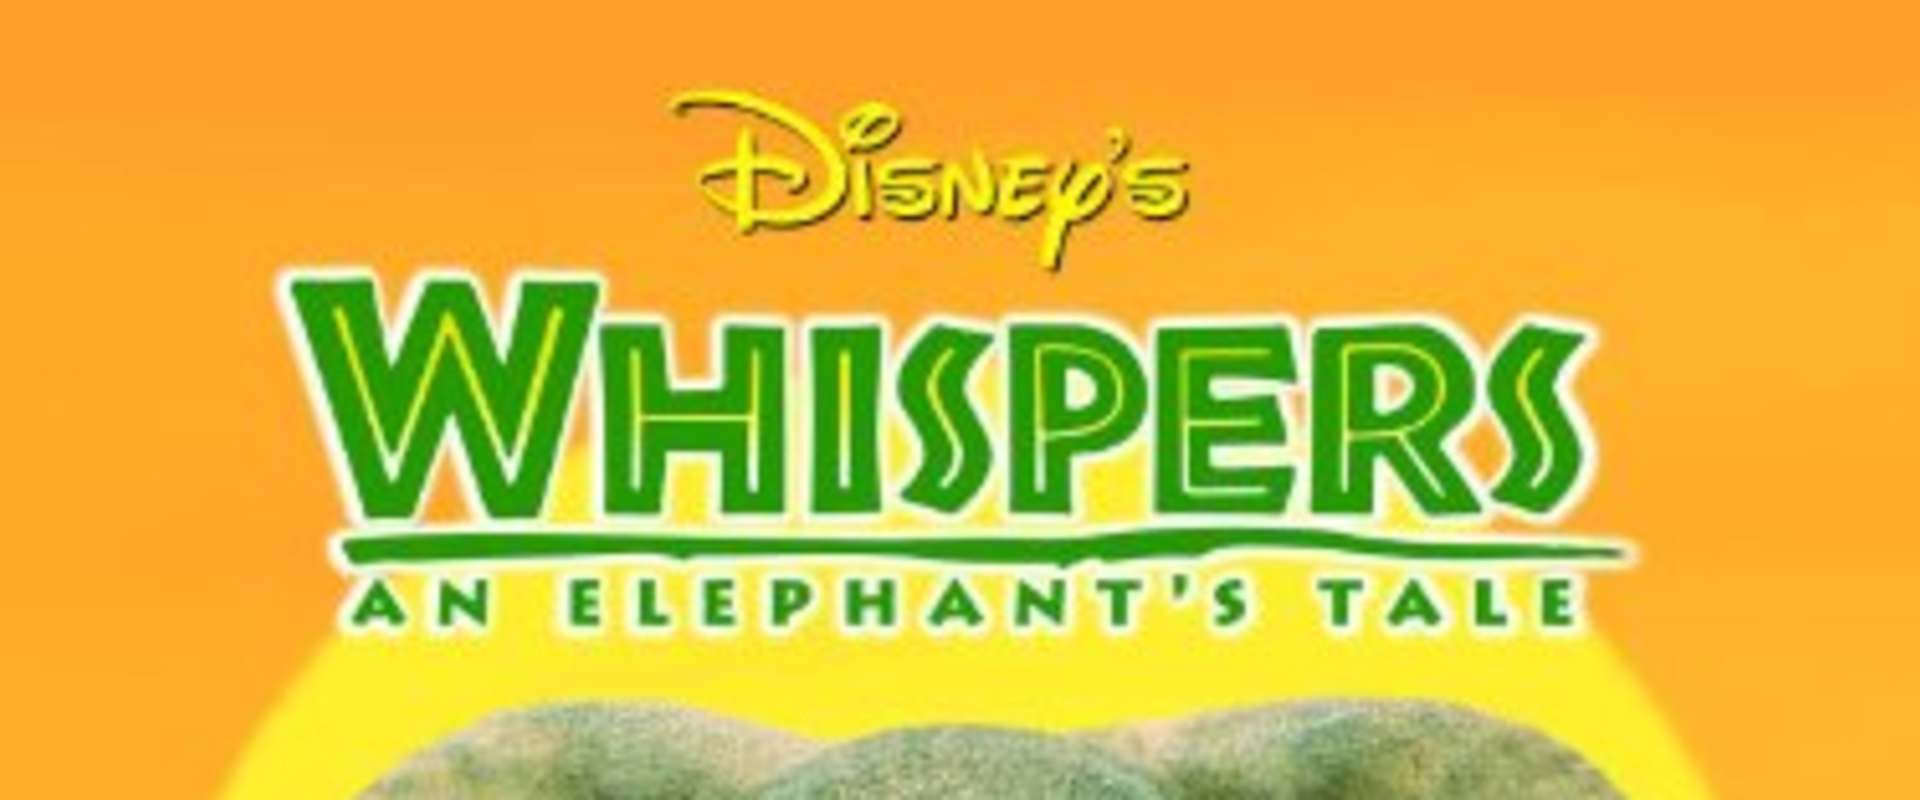 Whispers: An Elephant's Tale background 2